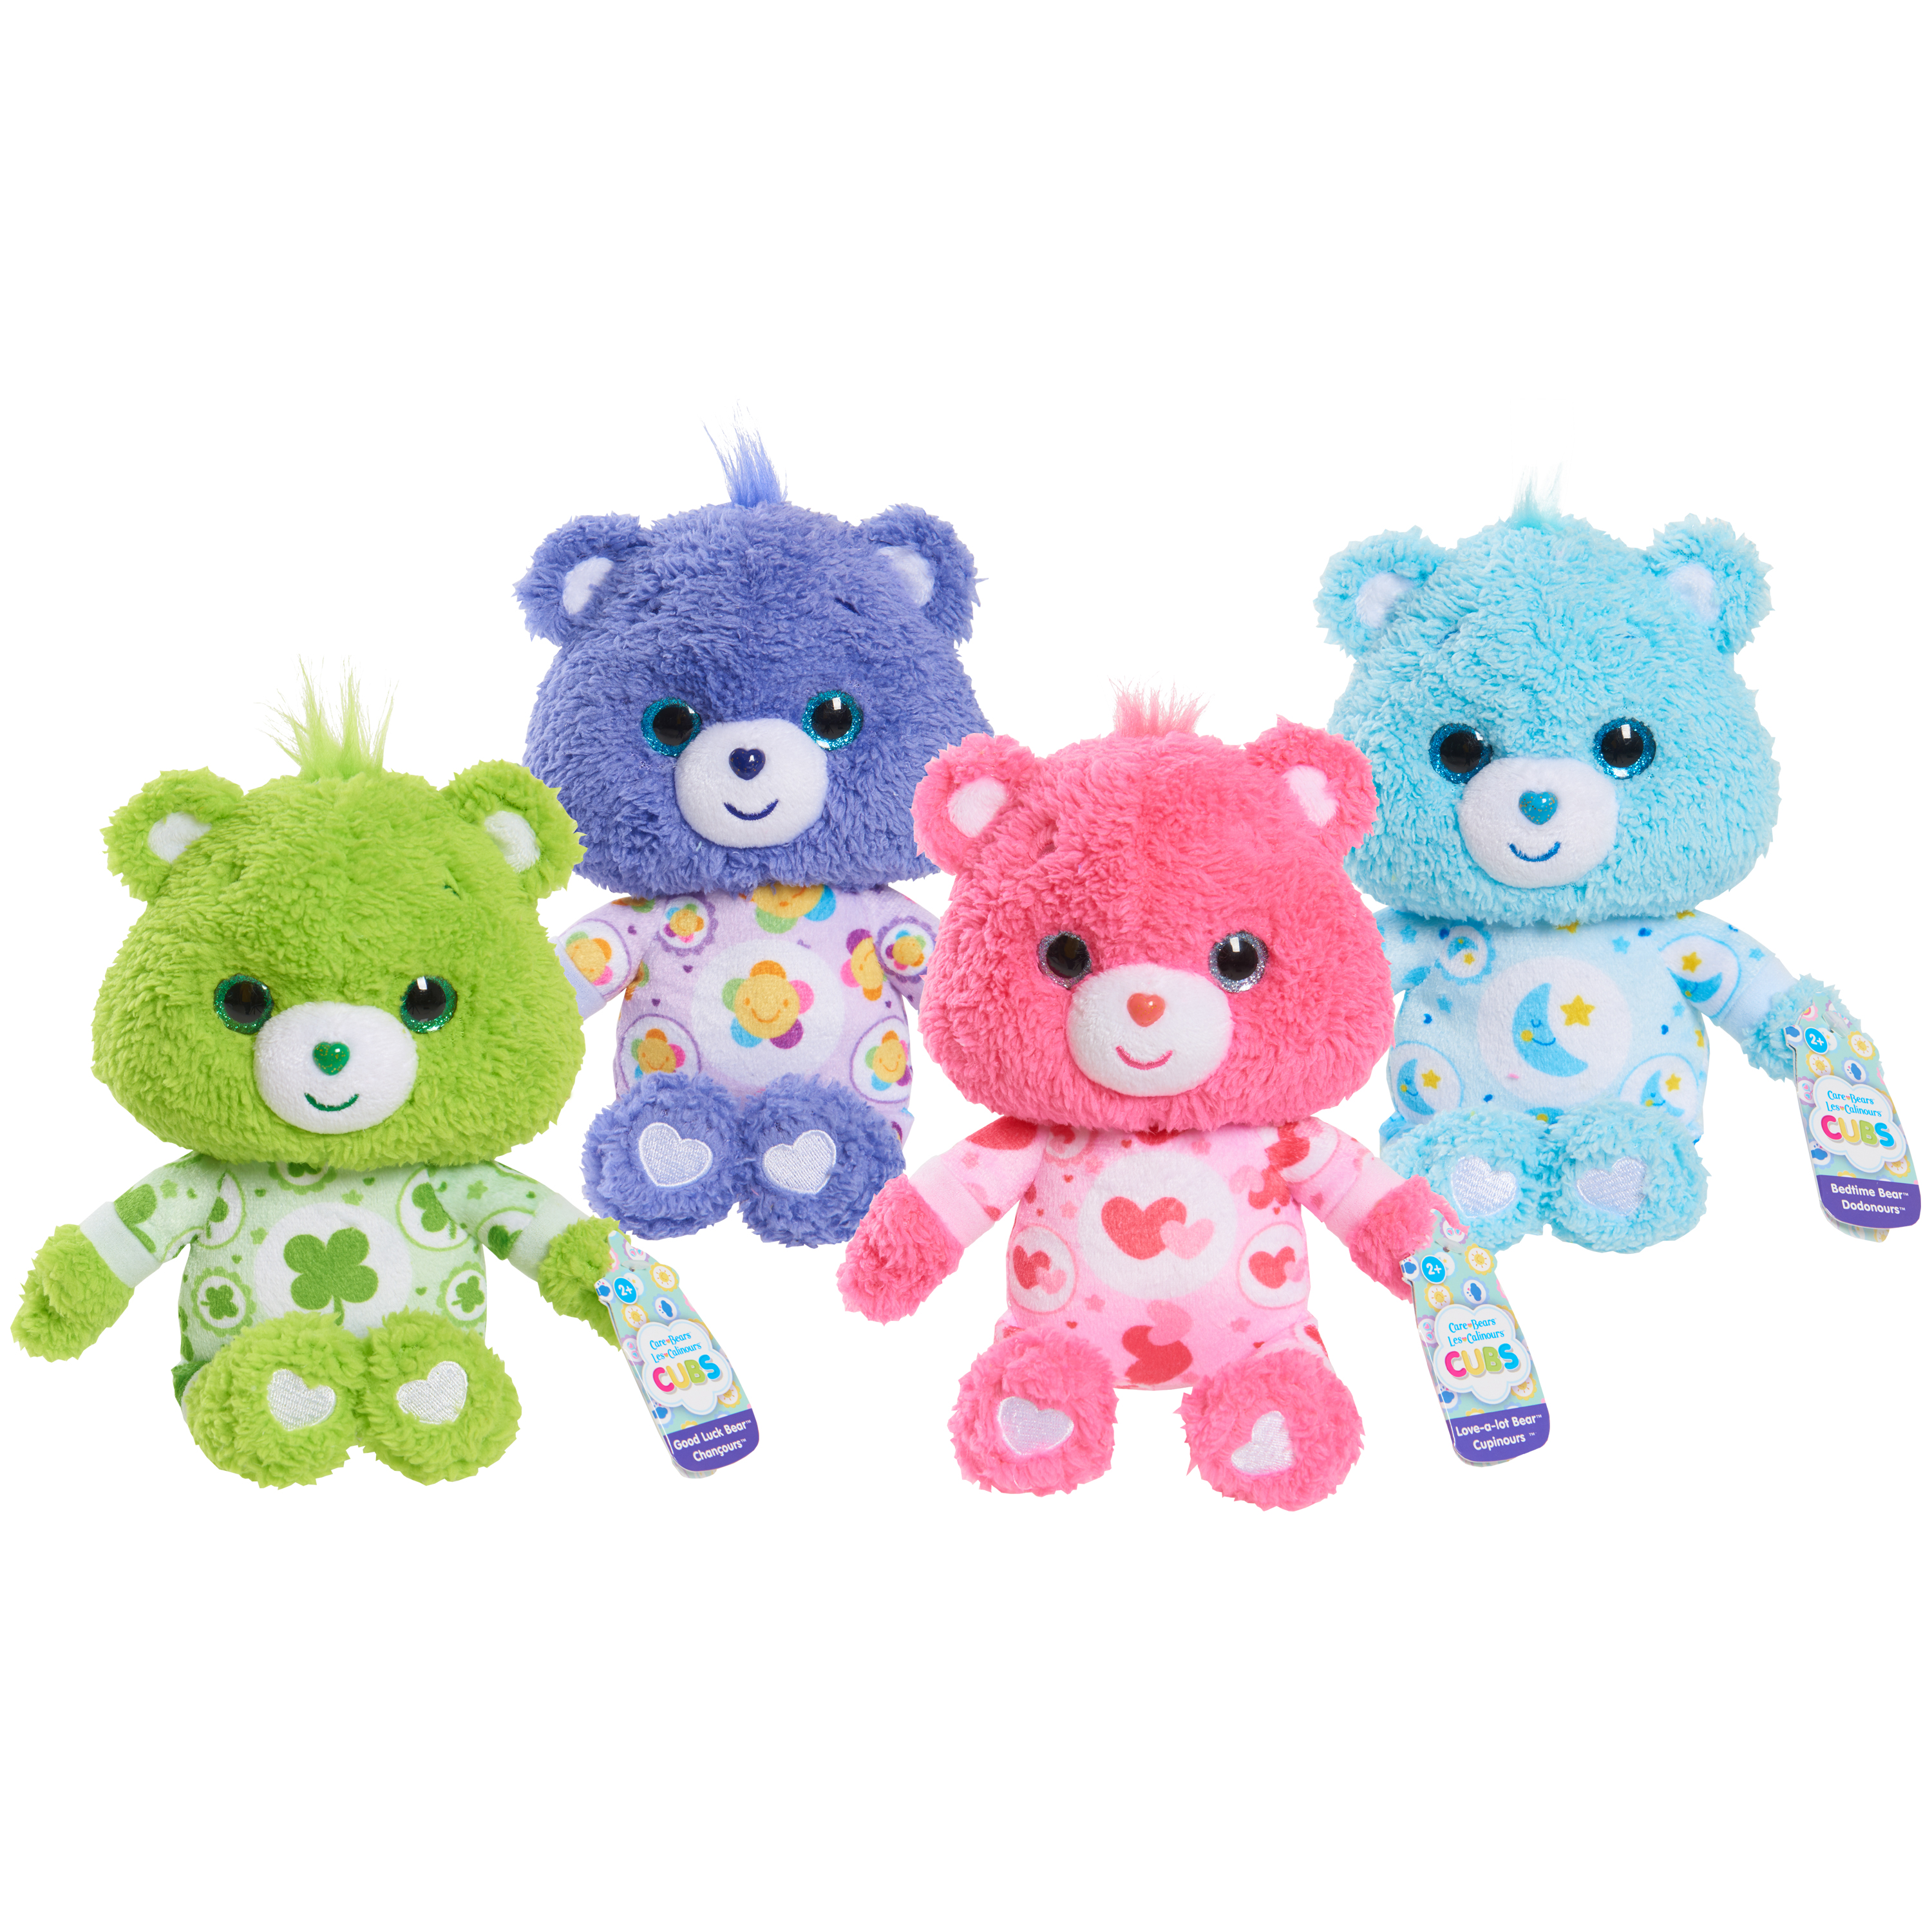 Care Bears Small Plush 4 pack.